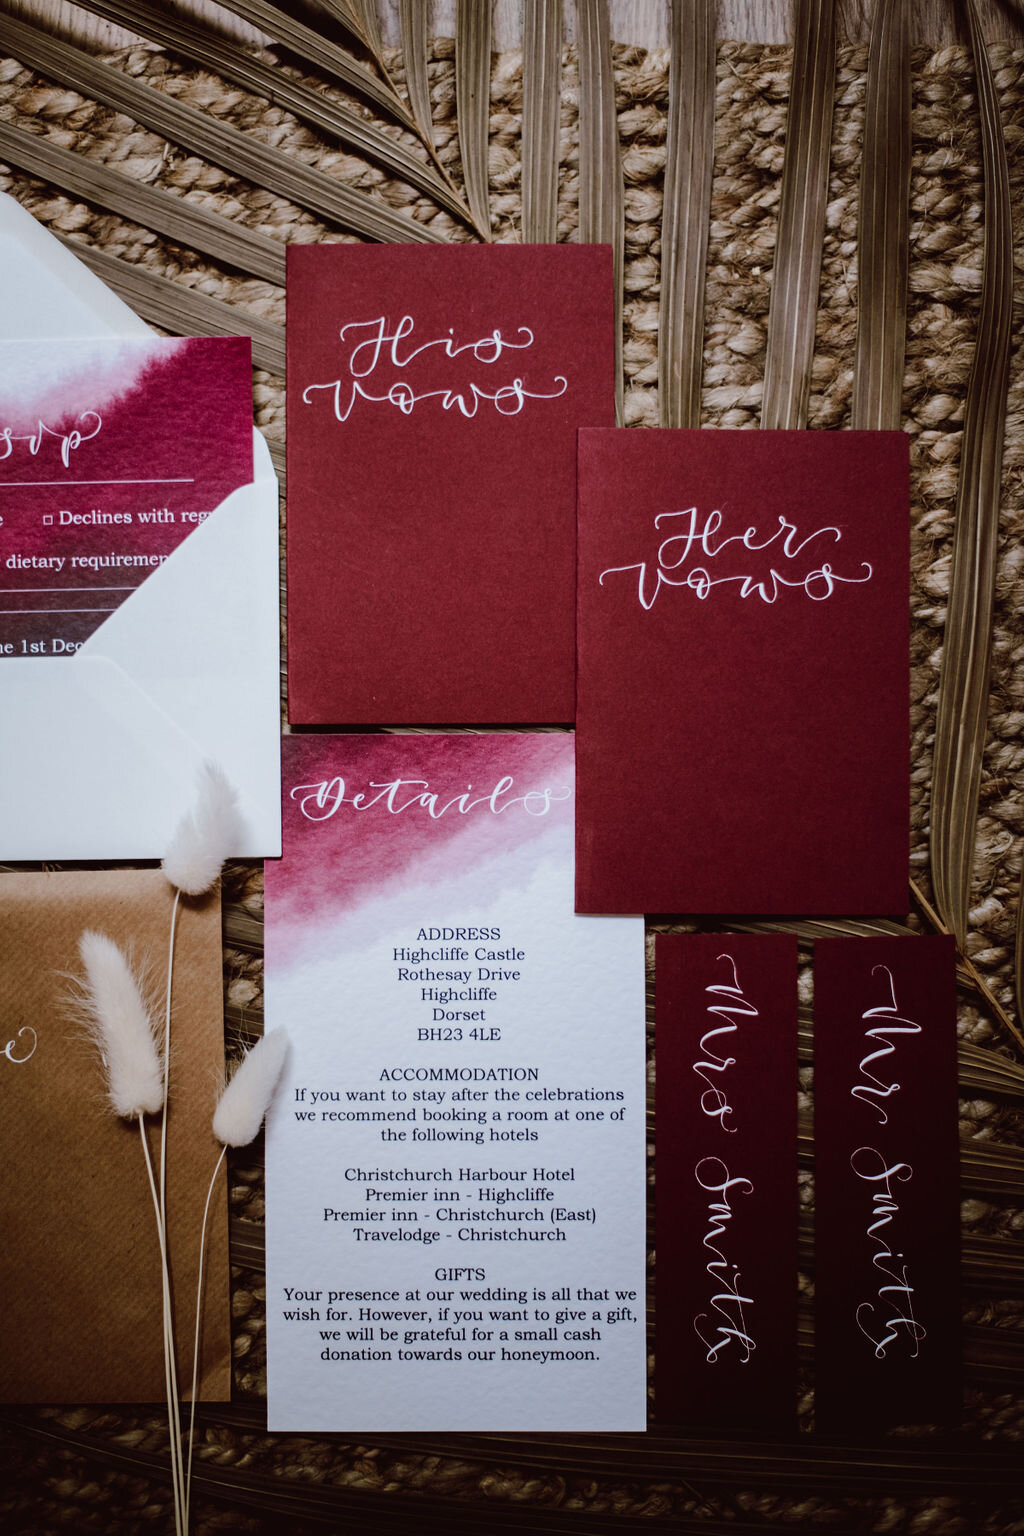 Burgundy watercolour and Highcliff castle illustration wedding wedding invitation suite with matching rsvp card - Calligraphy Vow books.jpg